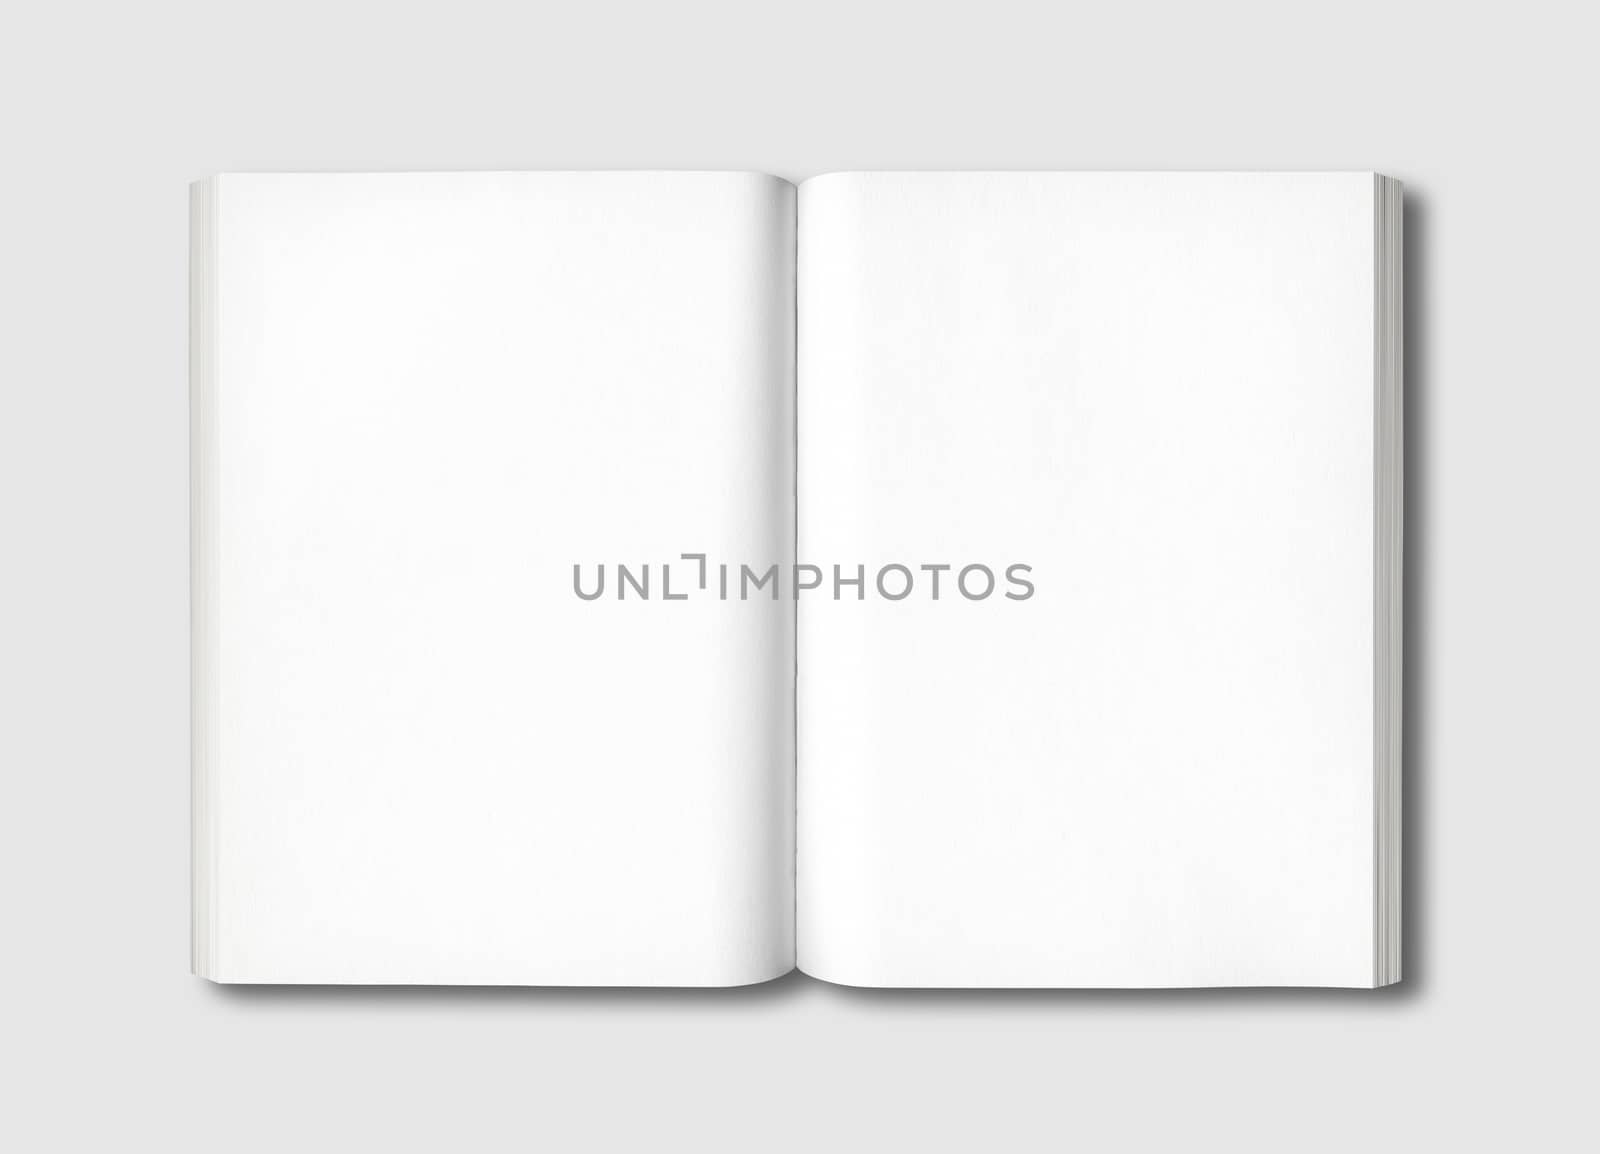 White open book isolated on a grey background